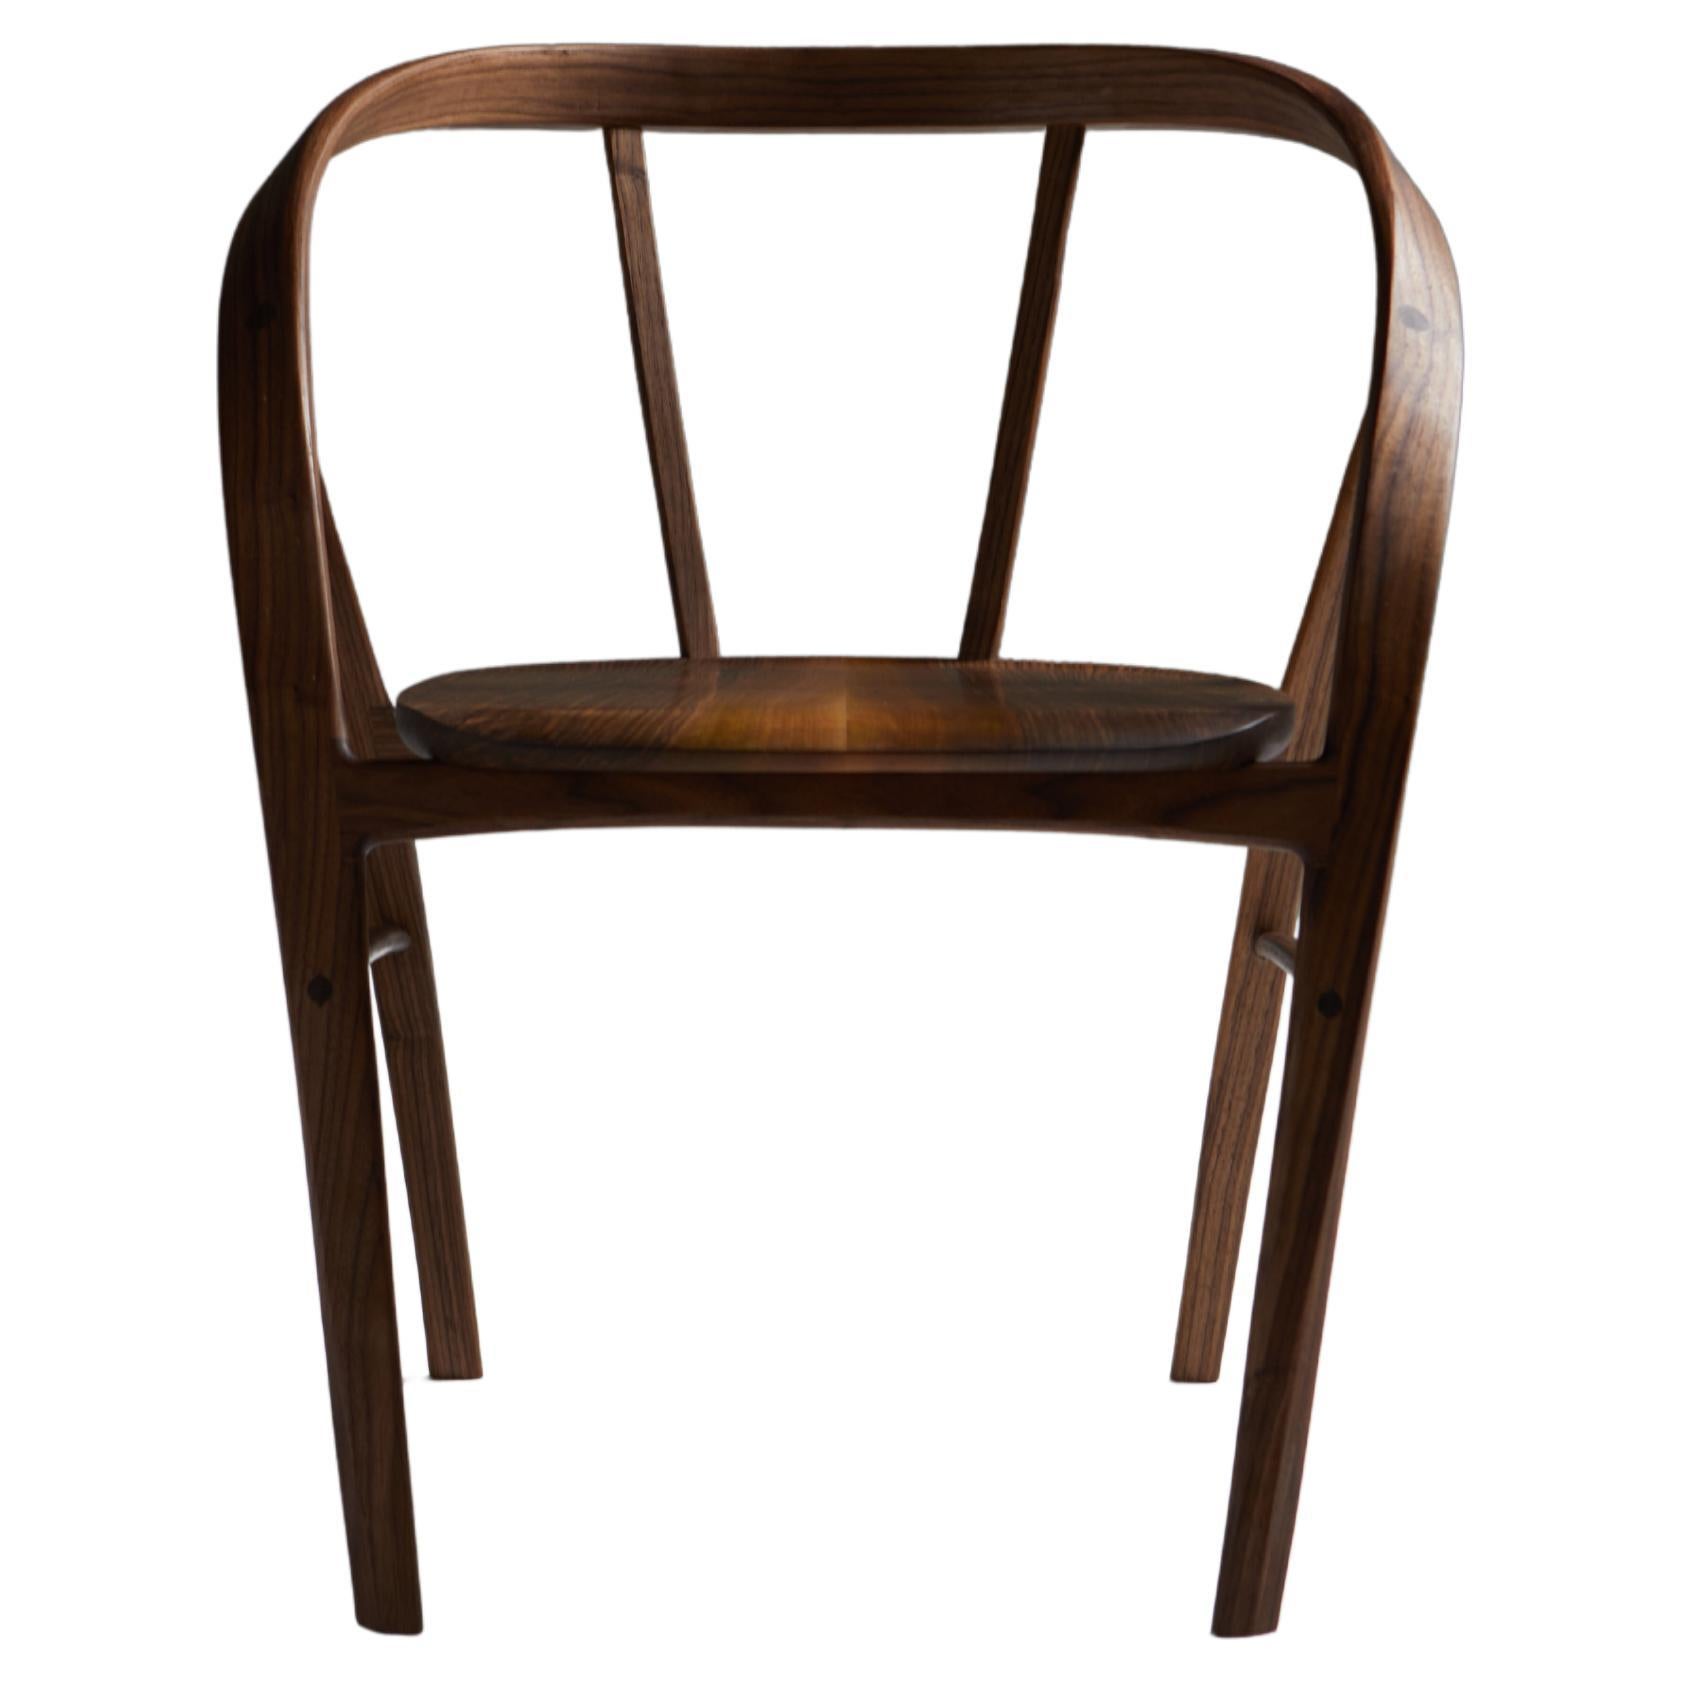 Carol Chair in Bent Wood and book-matched seat by Jonathan Field